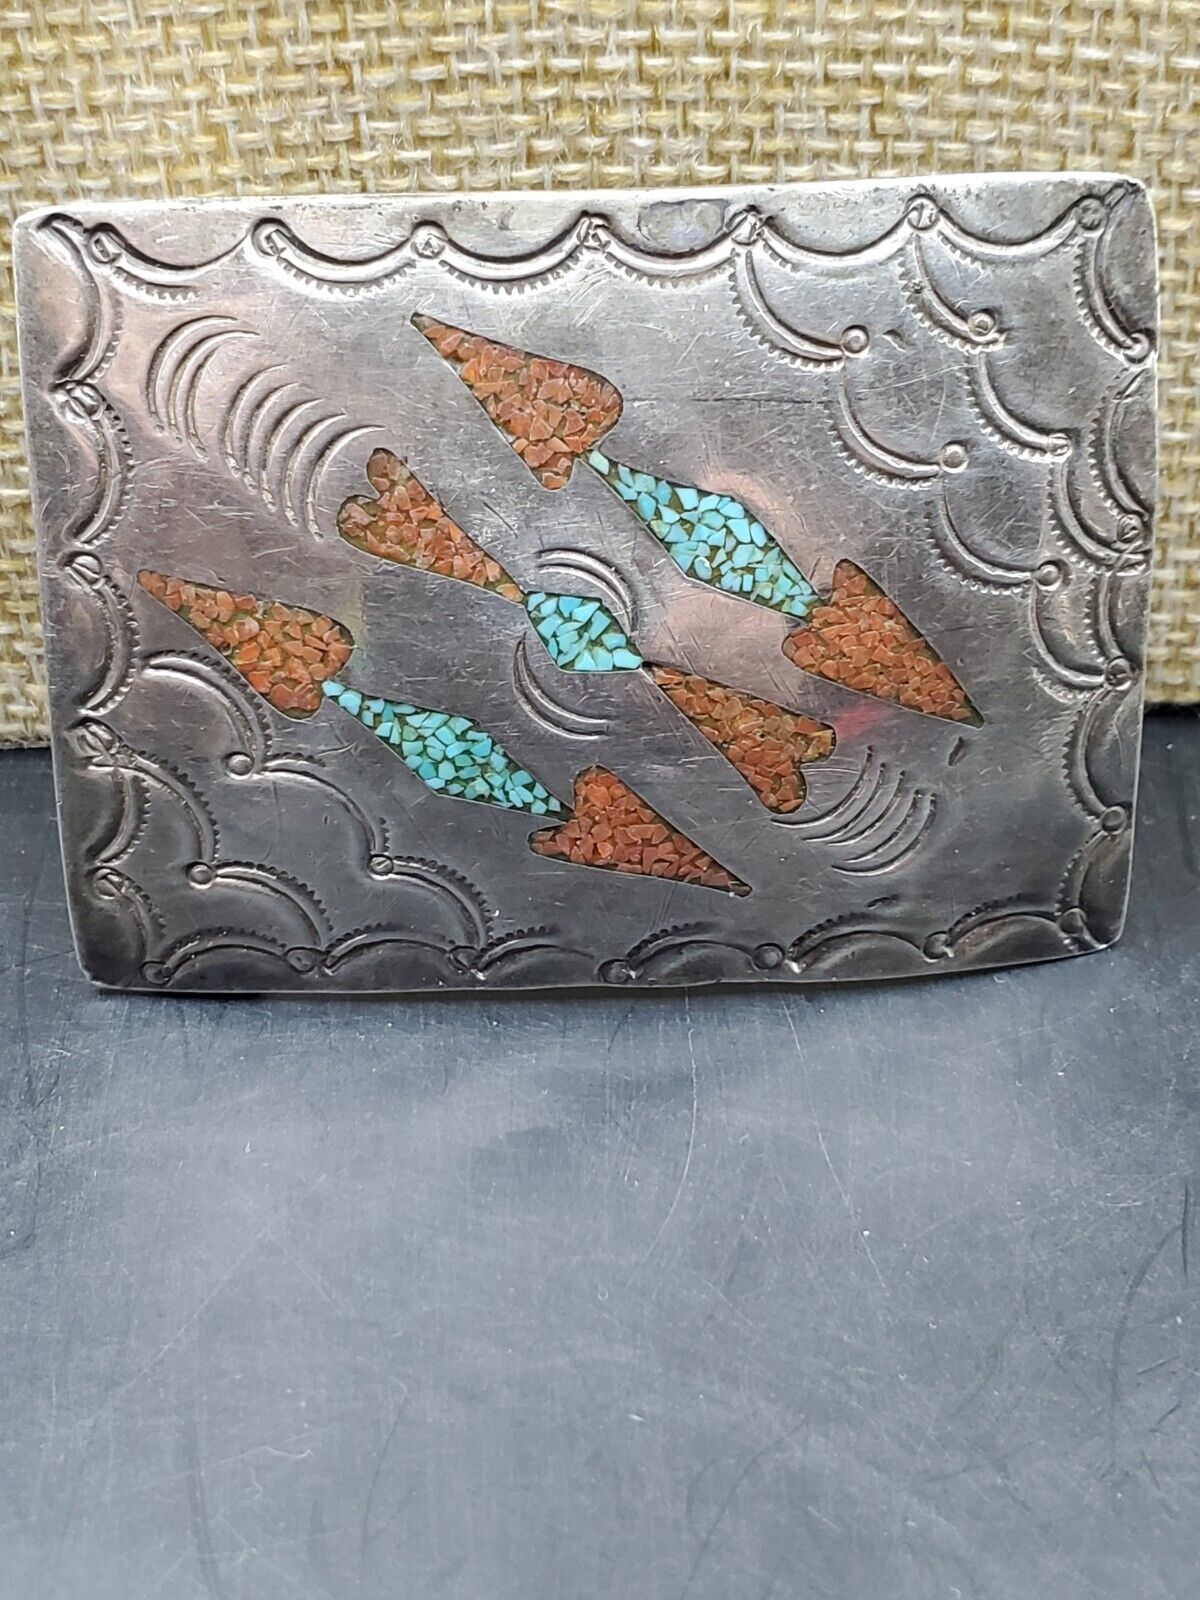 Vintage Jerry Johnson Silver, Turquoise & Coral In Lay Belt Buckle,  It's Signed